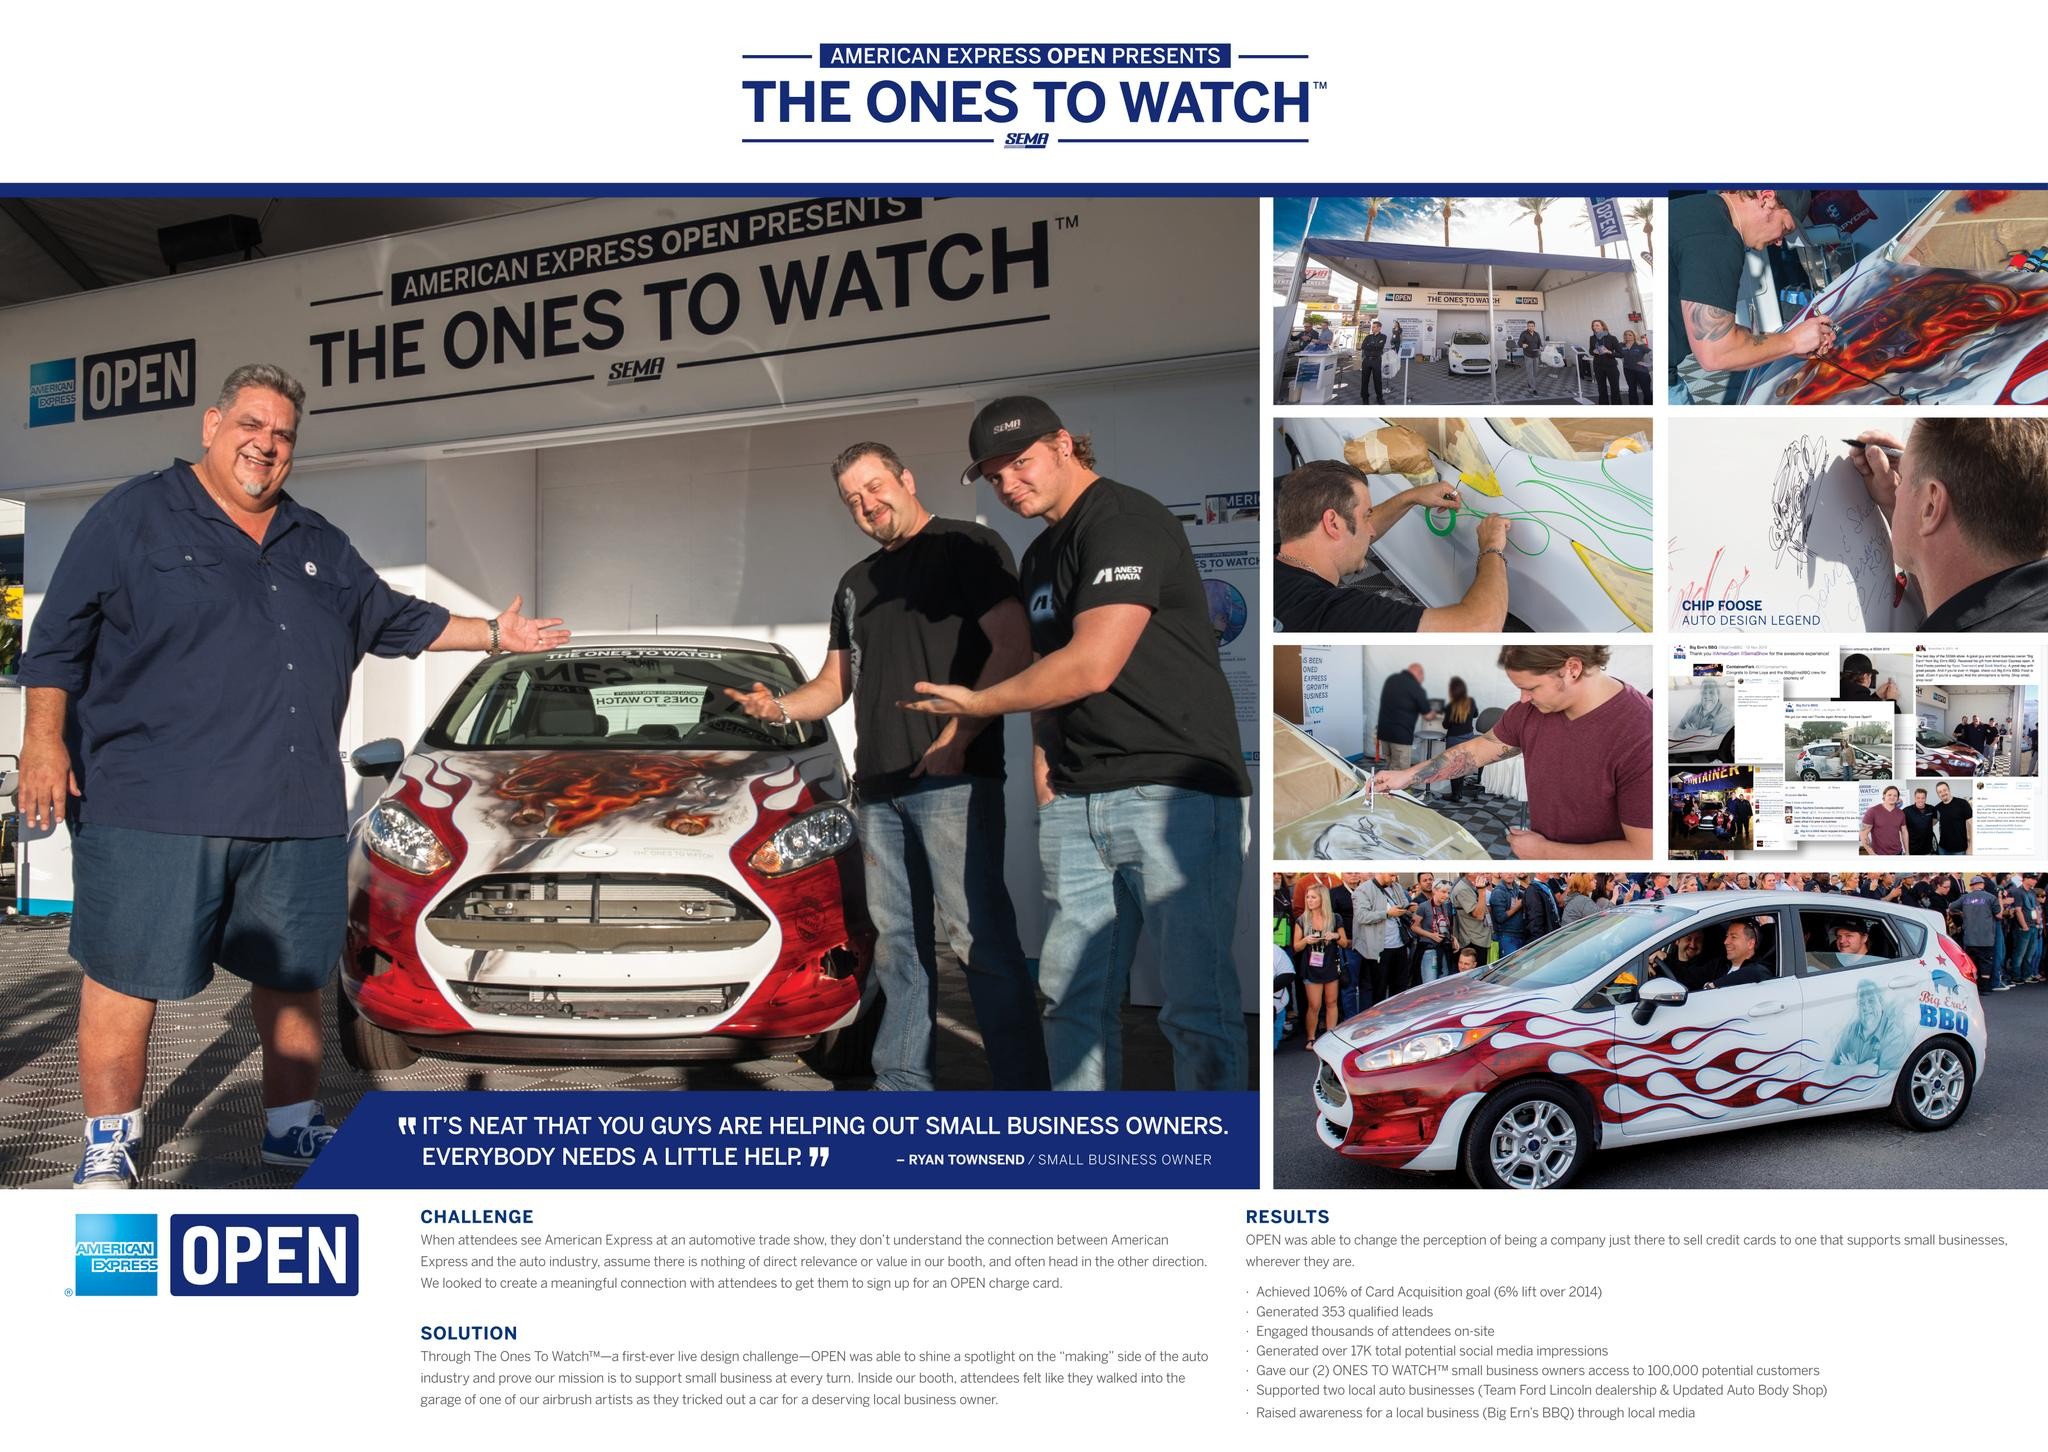 American Express OPEN: The Ones to Watch™ at SEMA 2015